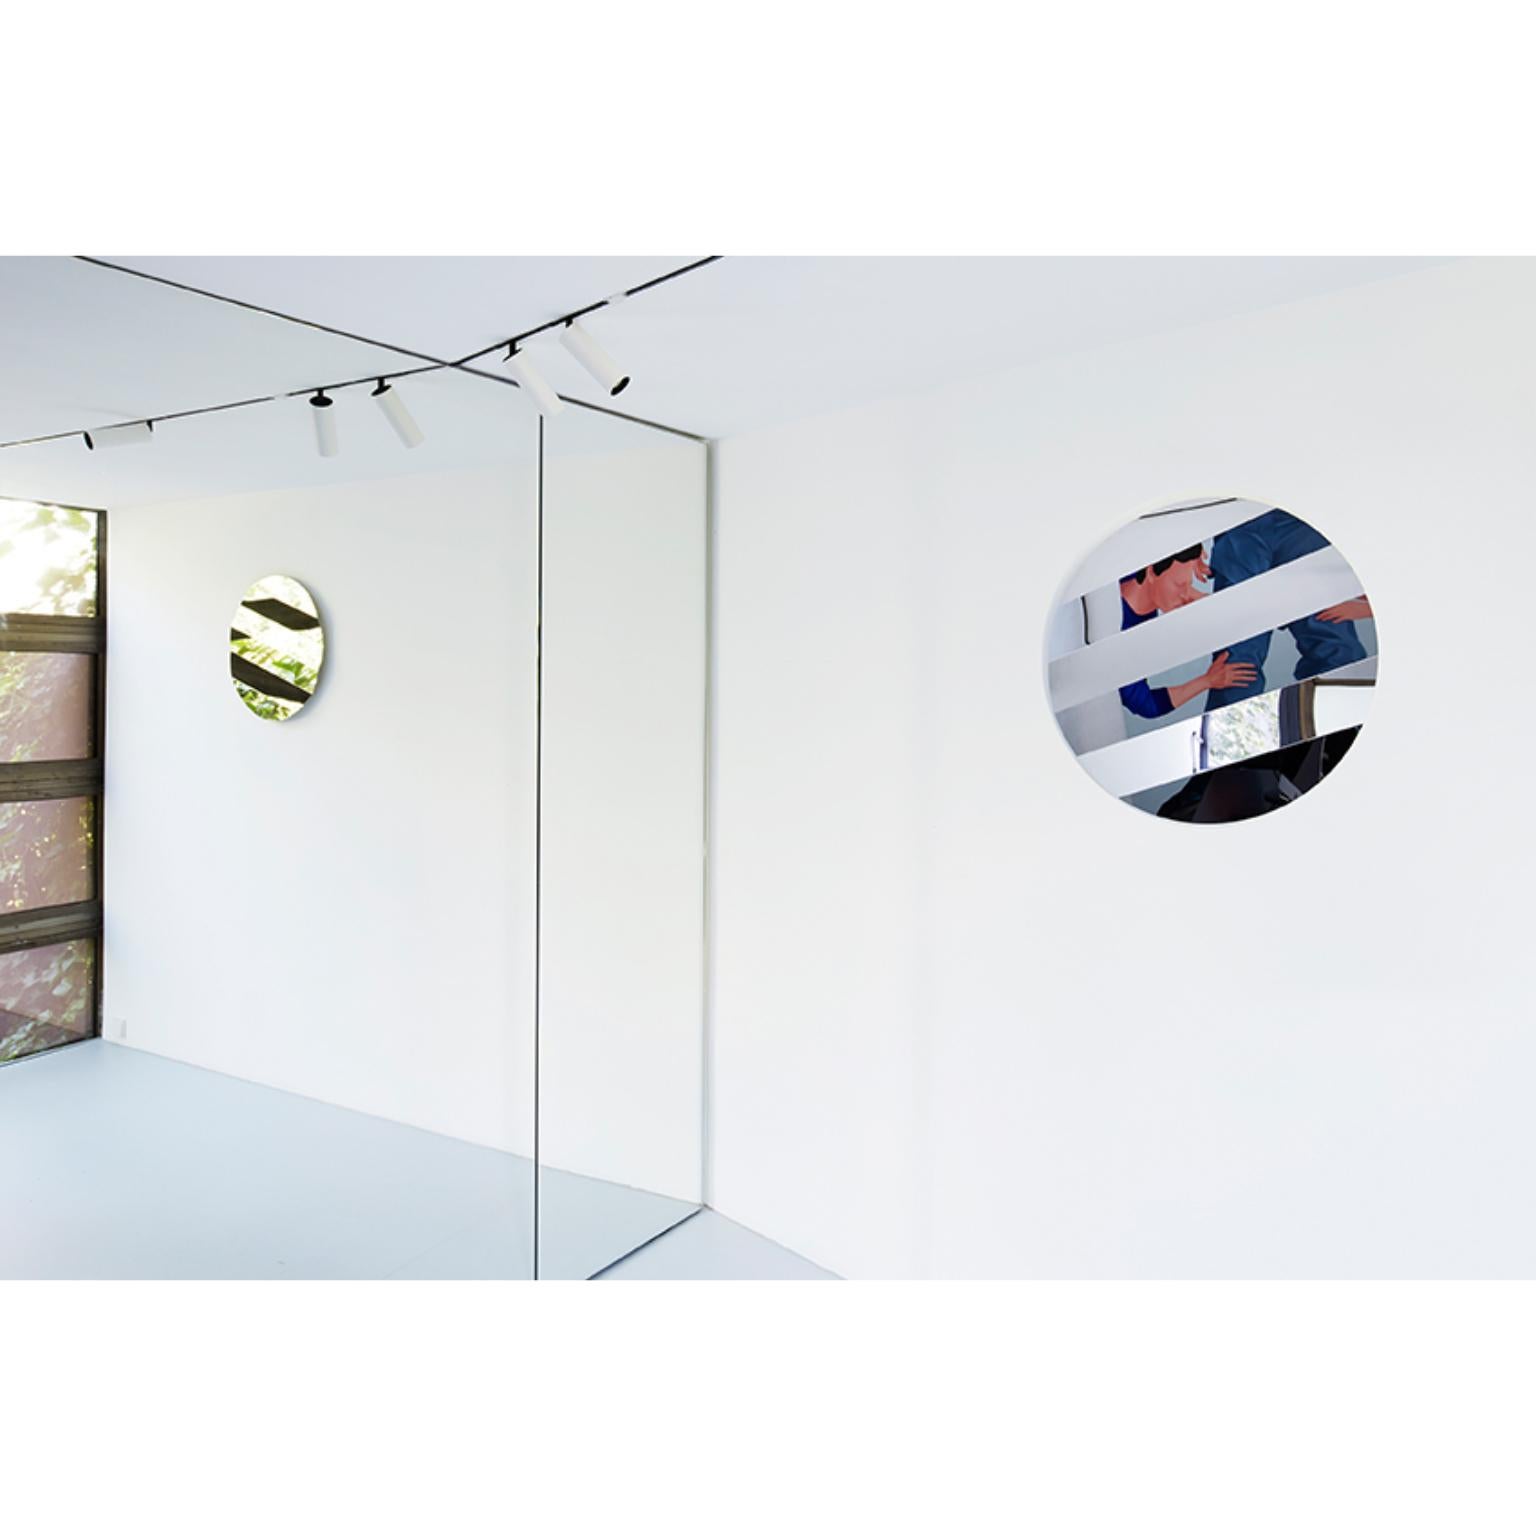 Stripe mirror 60 circle by Sebastian Scherer
Dimensions: ø : 60 
Materials: Mirror, stainless steel, wooden bracket
Different sizes are available. Square version available.

The STRIPE wall mirror creates a fascinating graphic effect: the